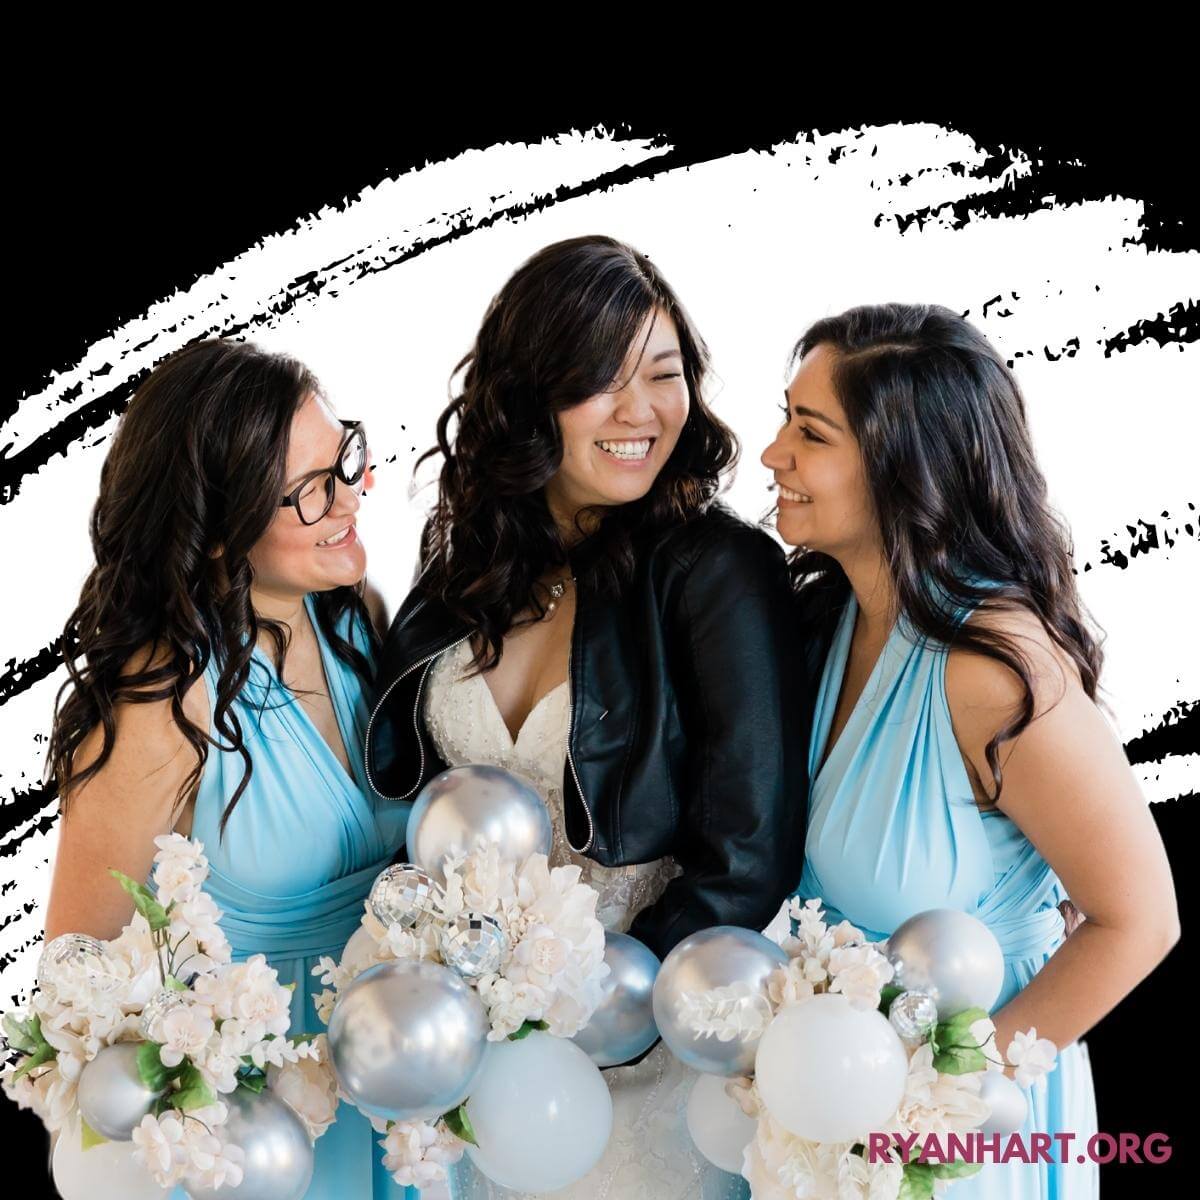 Bride and two bridesmaids smiling